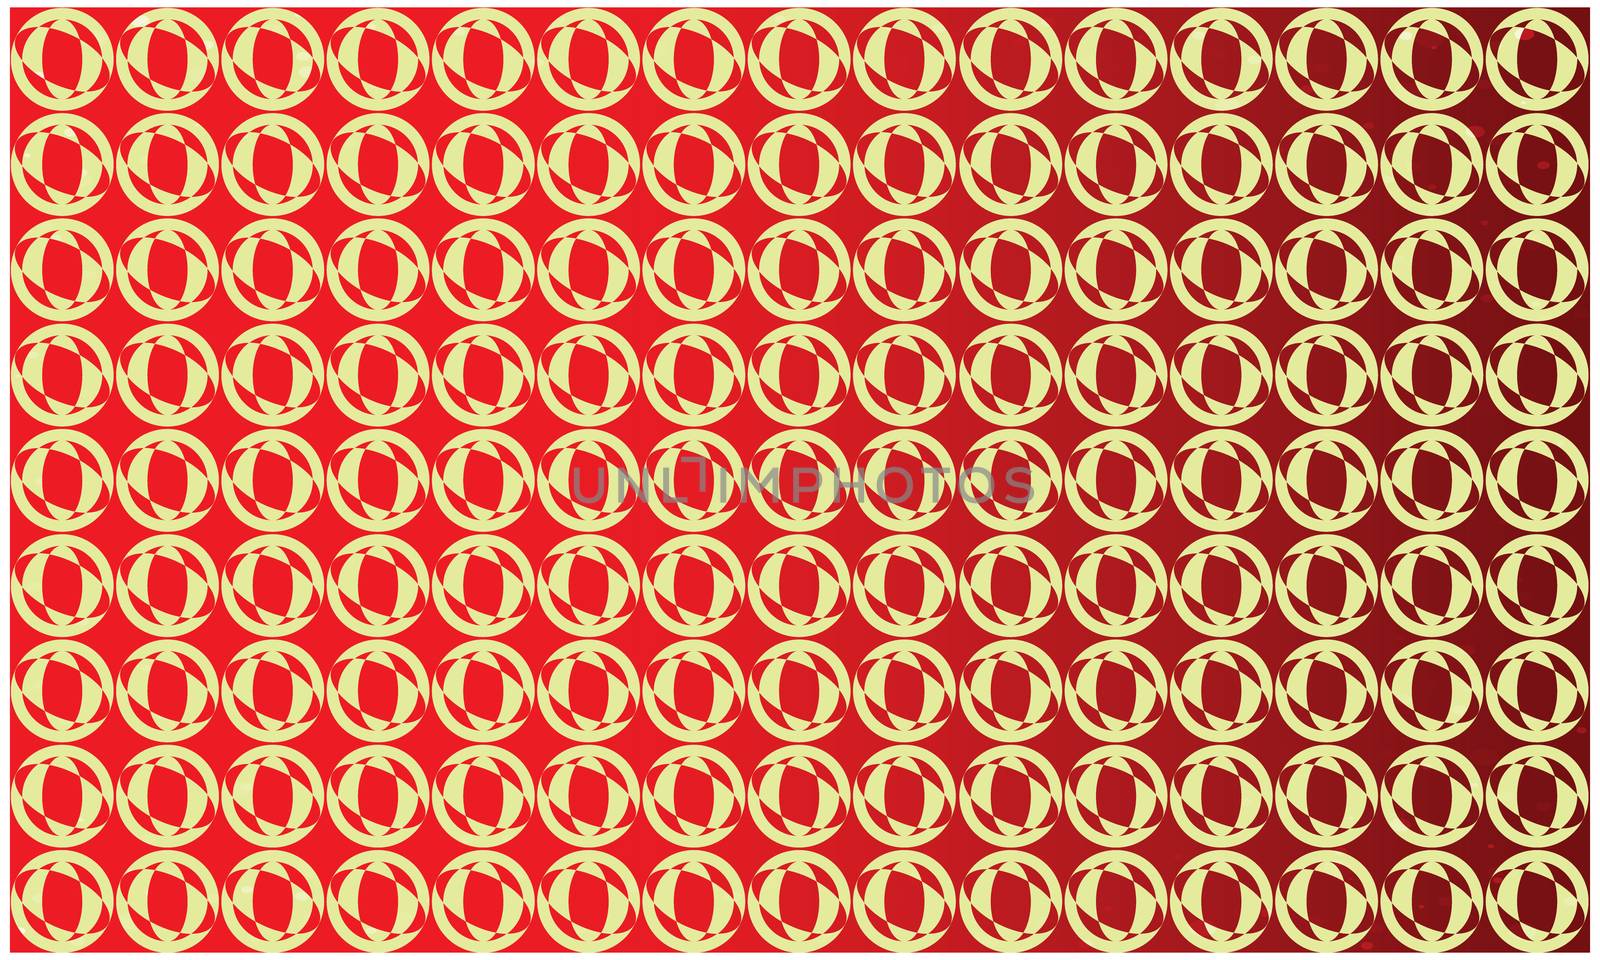 circles and ovals on abstract red background by aanavcreationsplus